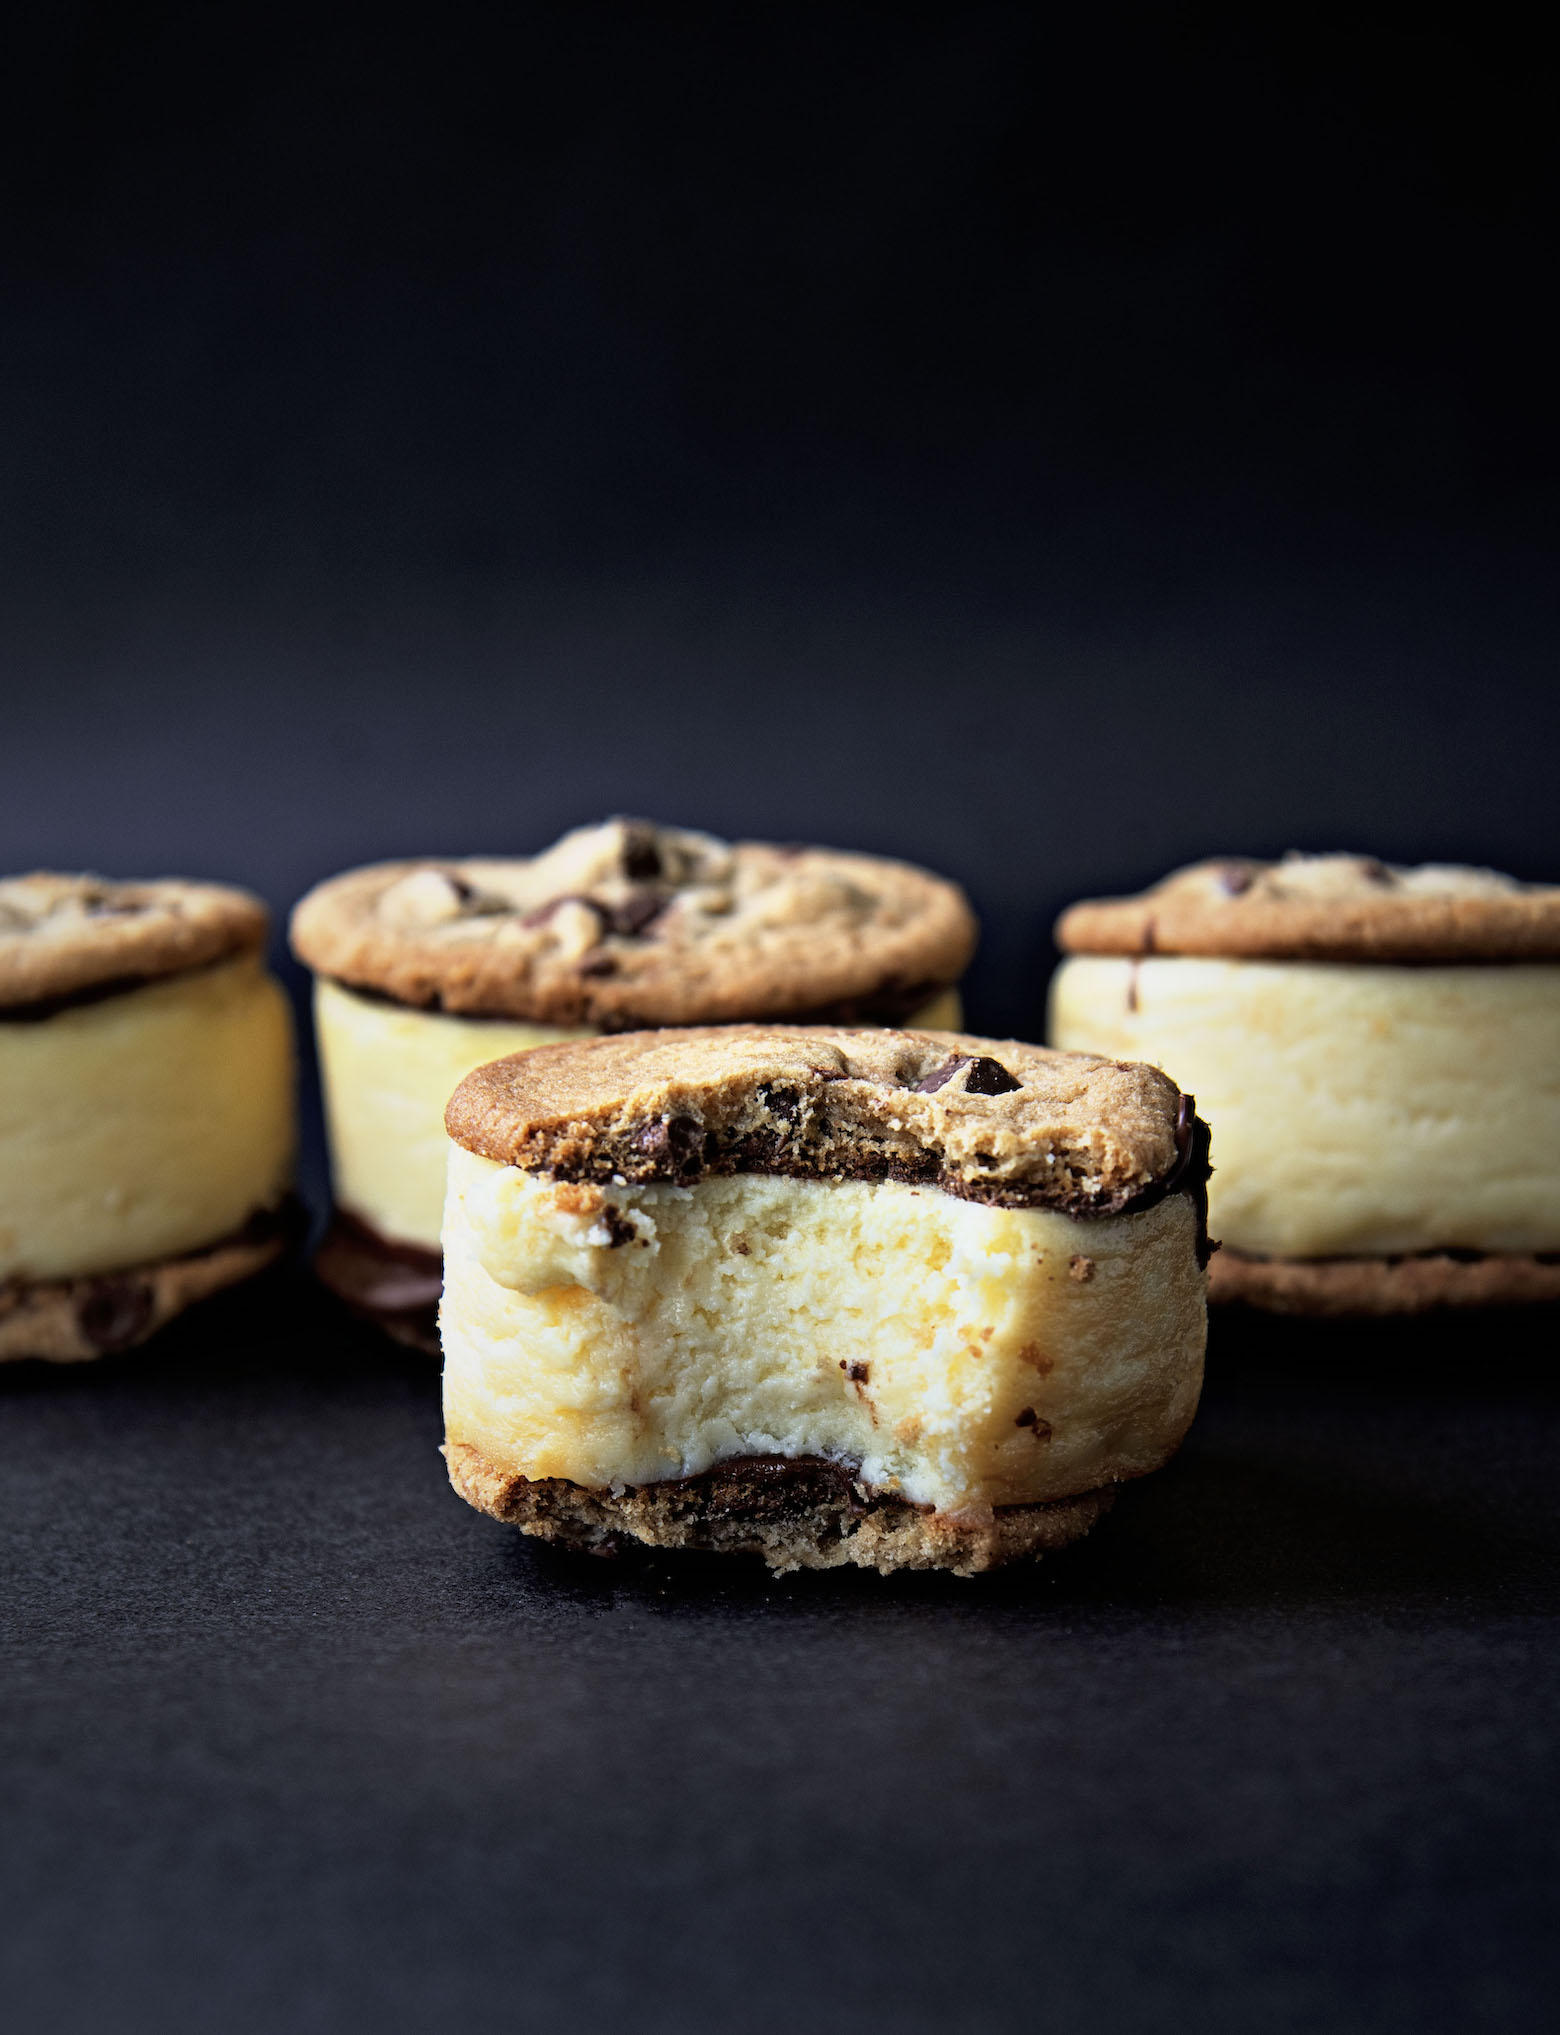 Several Chocolate Chip Cookie Cheesecake Sandwich in a row with one sandwich with a bite out of it in front of the others. Black background.